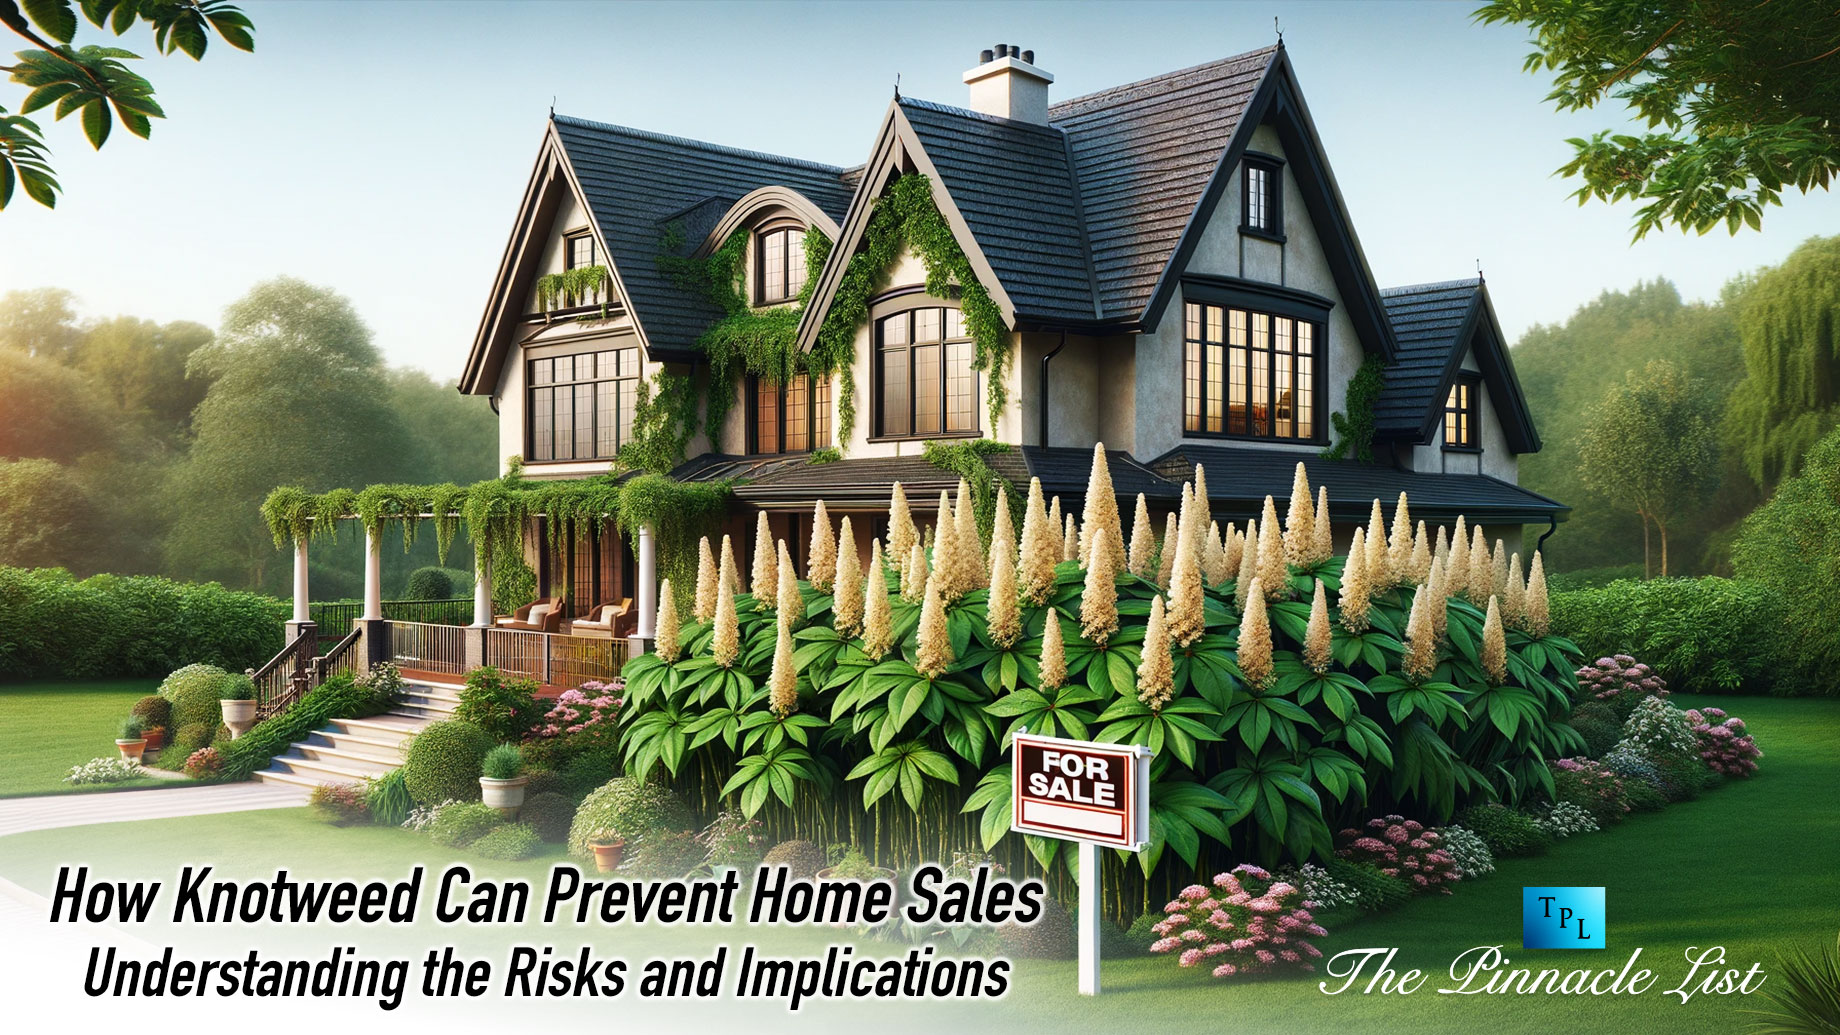 How Knotweed Can Prevent Home Sales: Understanding the Risks and Implications